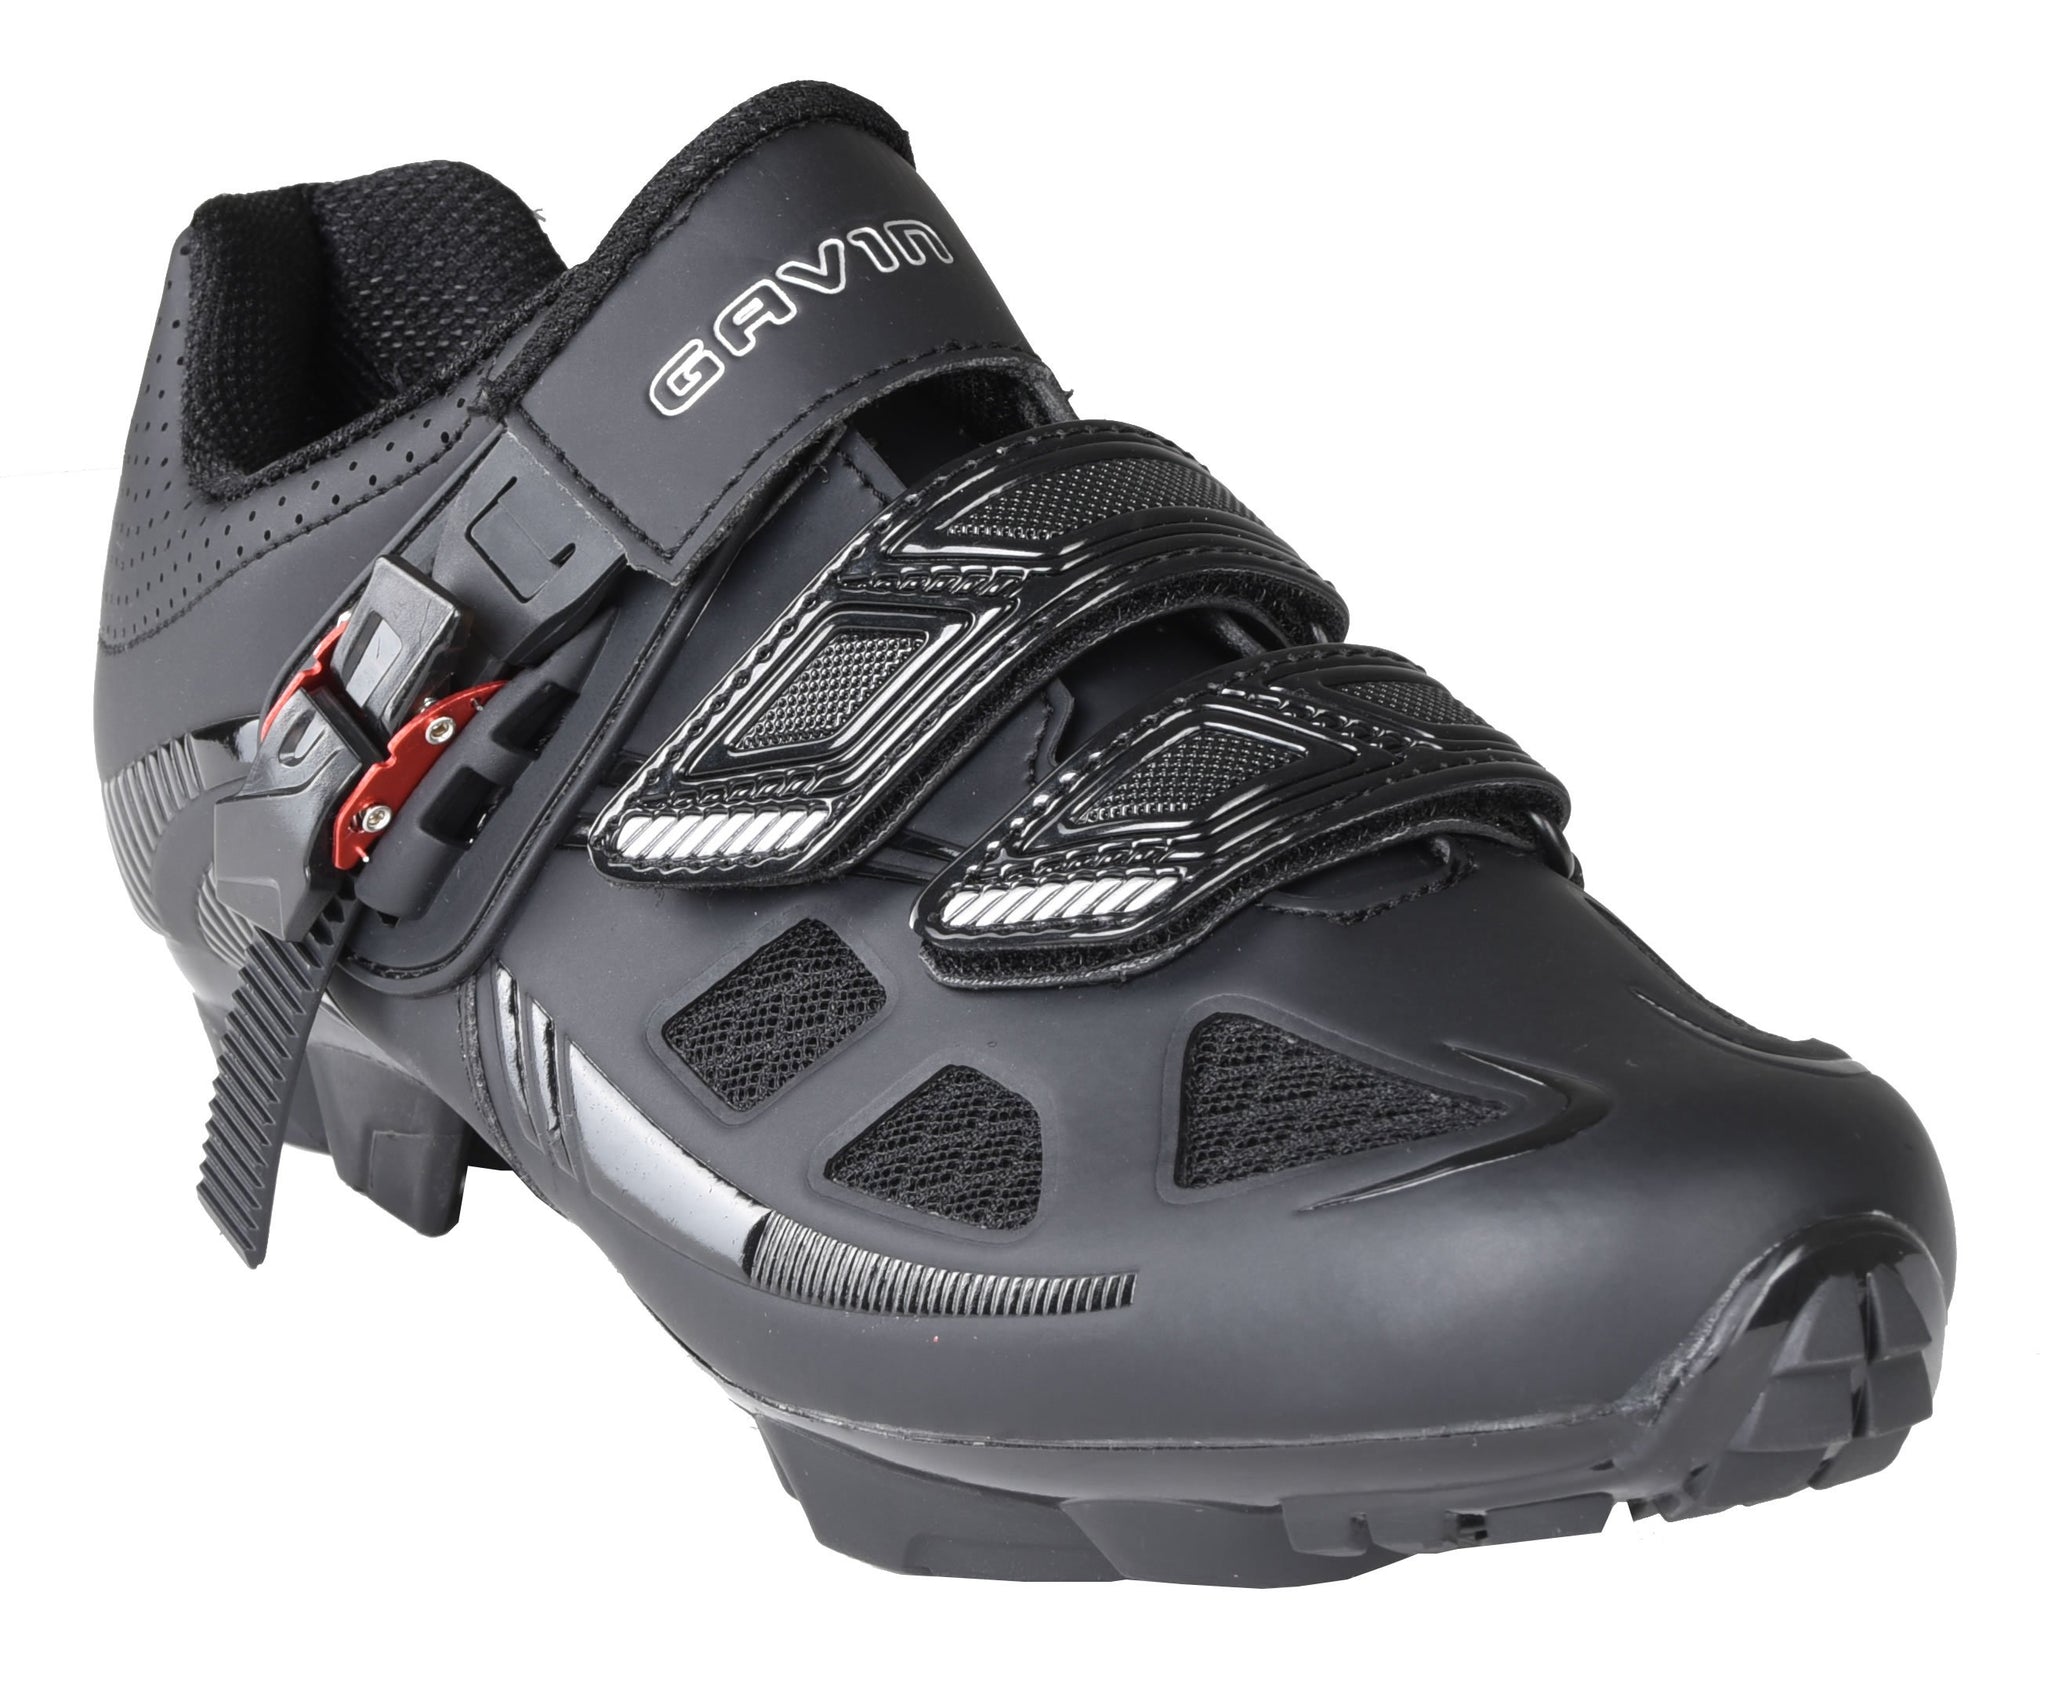 spd hiking shoes